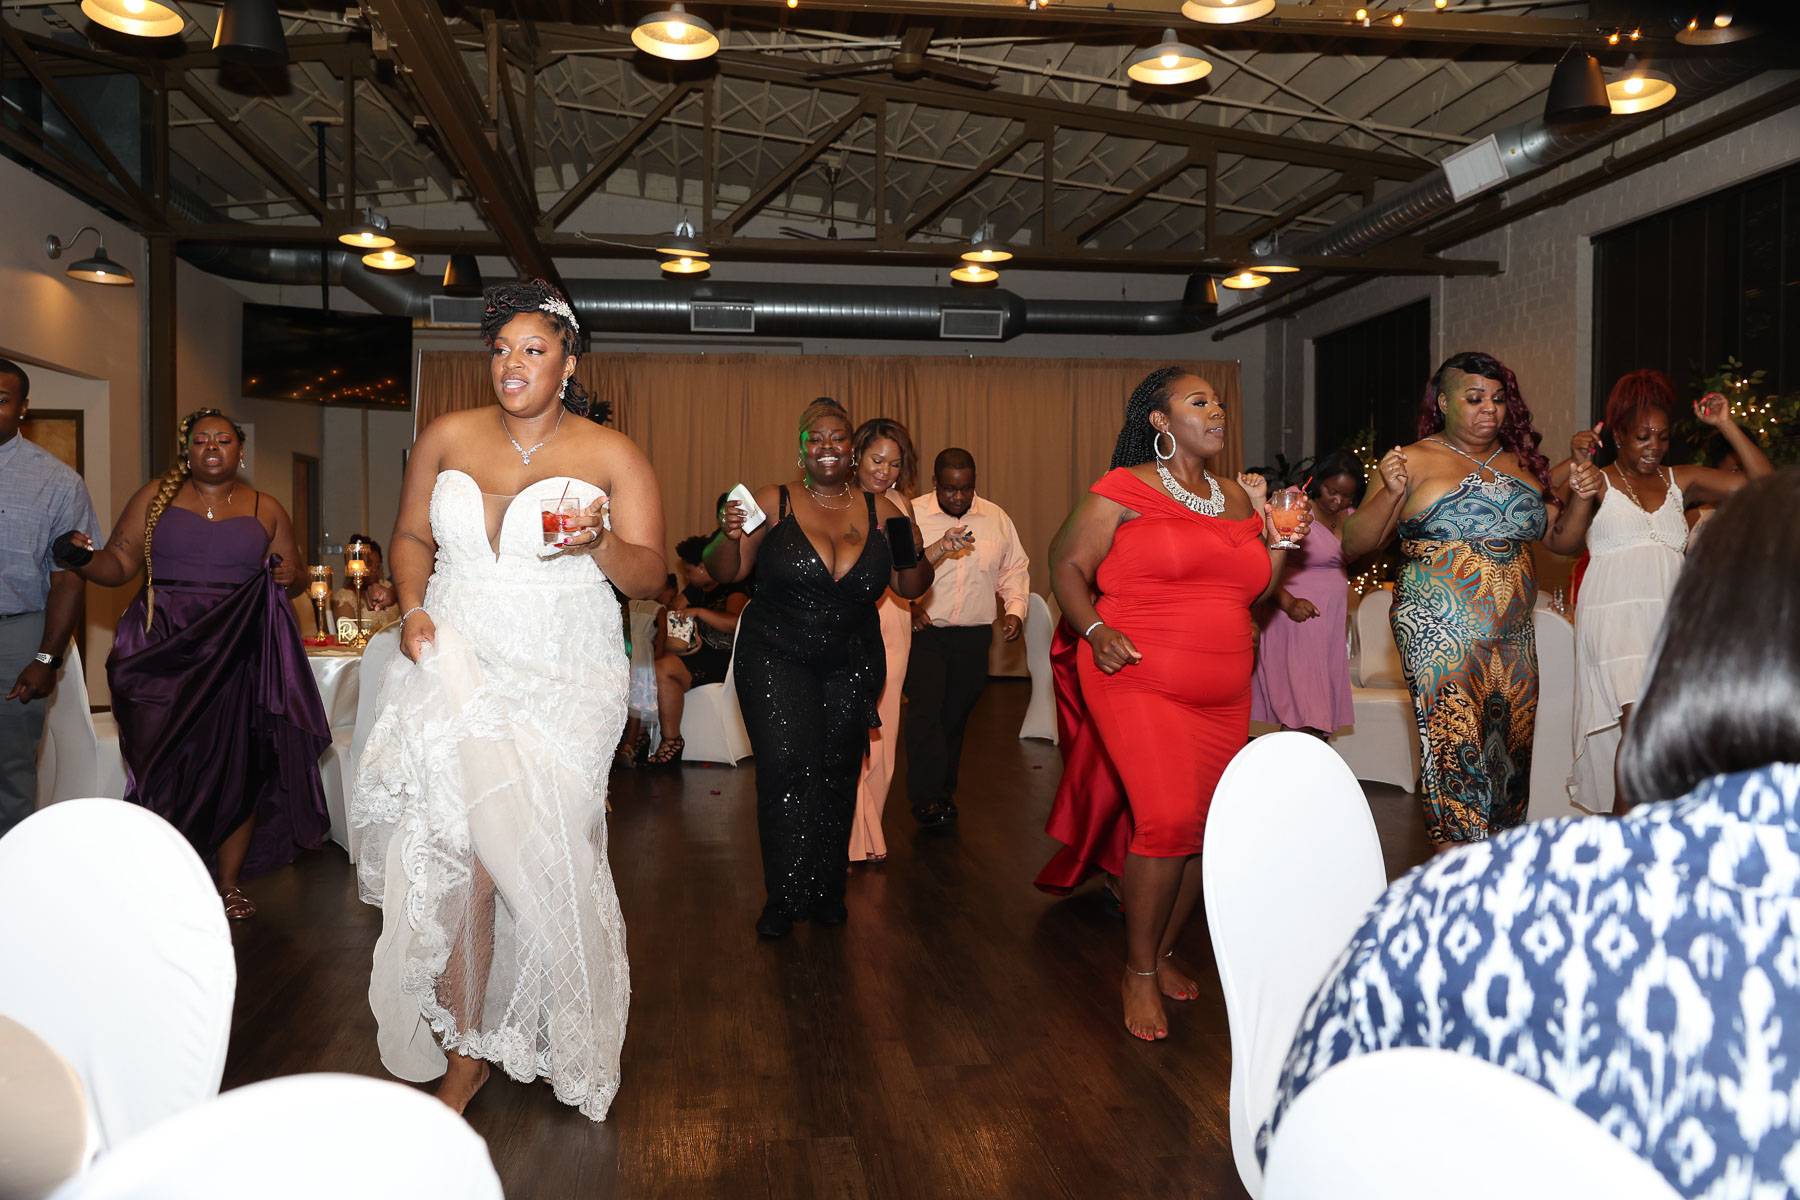 The bride and guests moving with the music